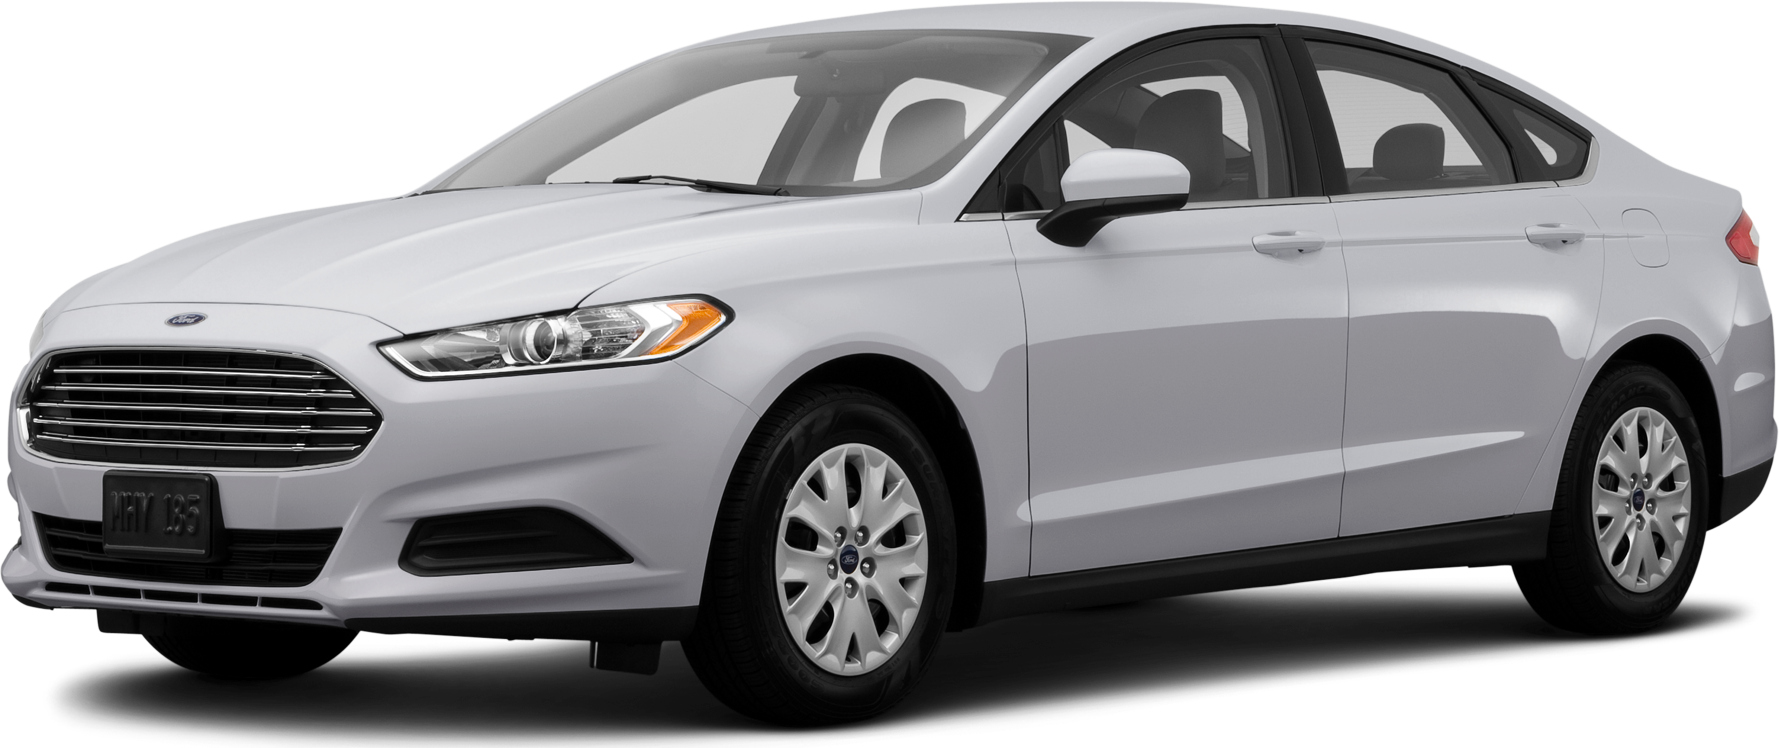 2014 Ford Fusion Price Kbb Value Cars For Sale Kelley Blue Book